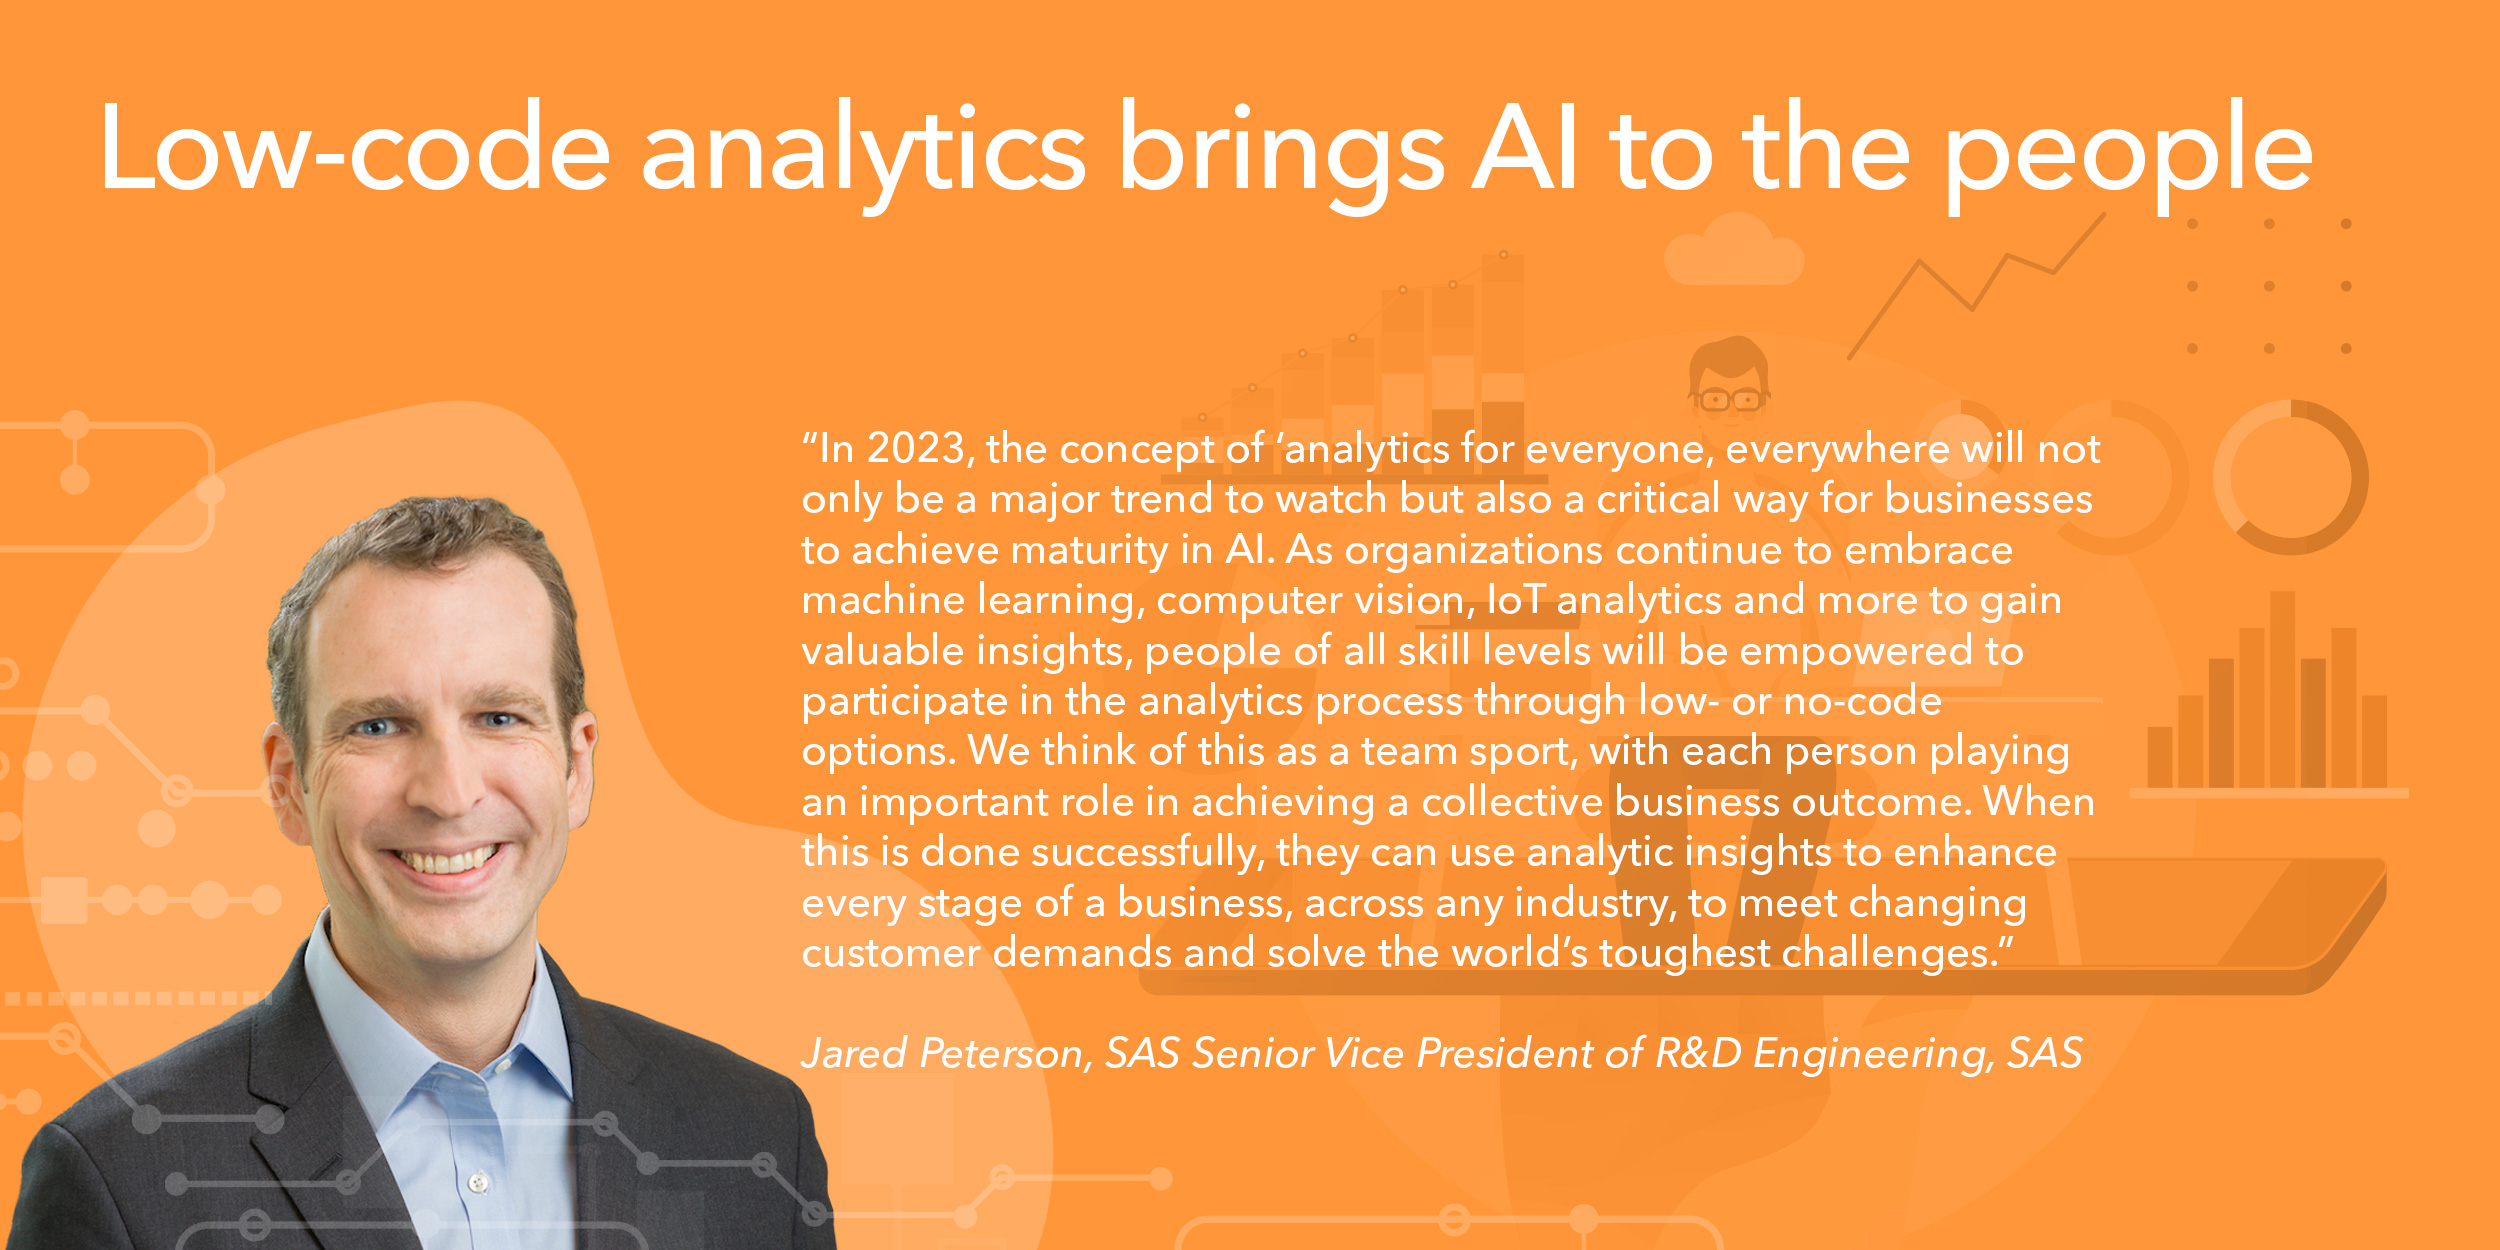 In 2023, the concept of ‘analytics for everyone, everywhere' will not only be a major trend to watch but also a critical way for businesses to achieve maturity in AI. As organizations continue to embrace machine learning, computer vision, IoT analytics and more to gain valuable insights, people of all skill levels will be empowered to participate in the analytics process through low- or no-code options. We think of this as a team sport, with each person playing an important role in achieving a collective business outcome. When this is done successfully, they can use analytic insights to enhance every stage of a business, across any industry, to meet changing customer demands and solve the world’s toughest challenges.